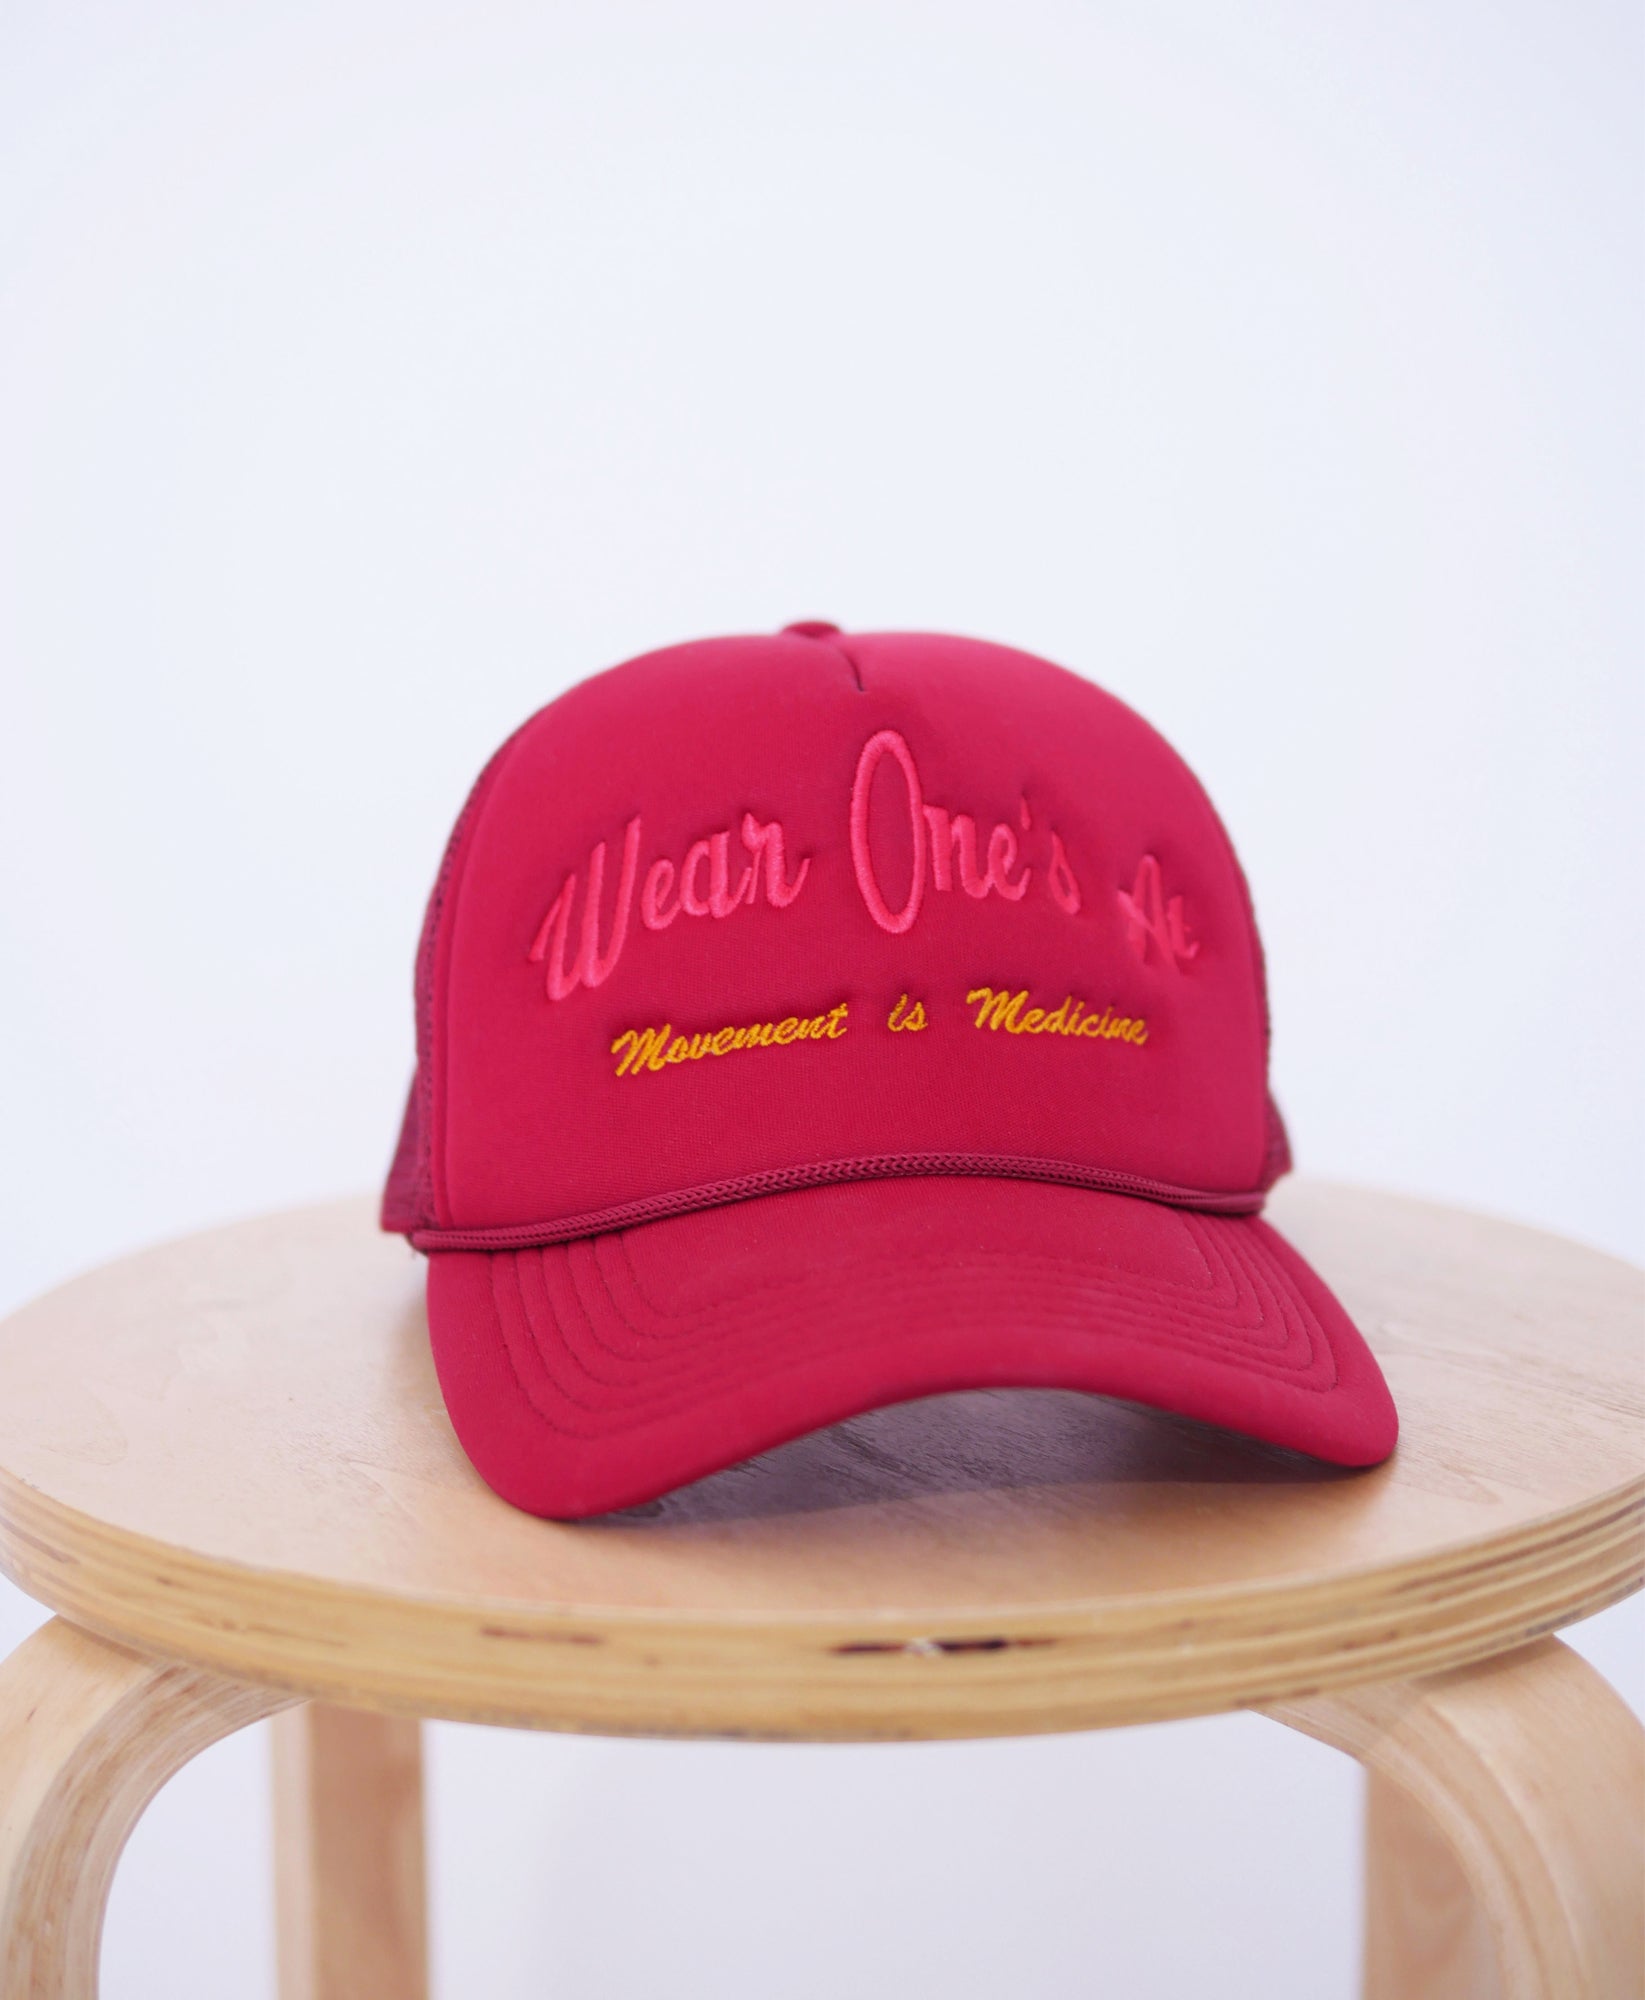 Wear One's At Logo Trucker Hat in Mars Red Front View